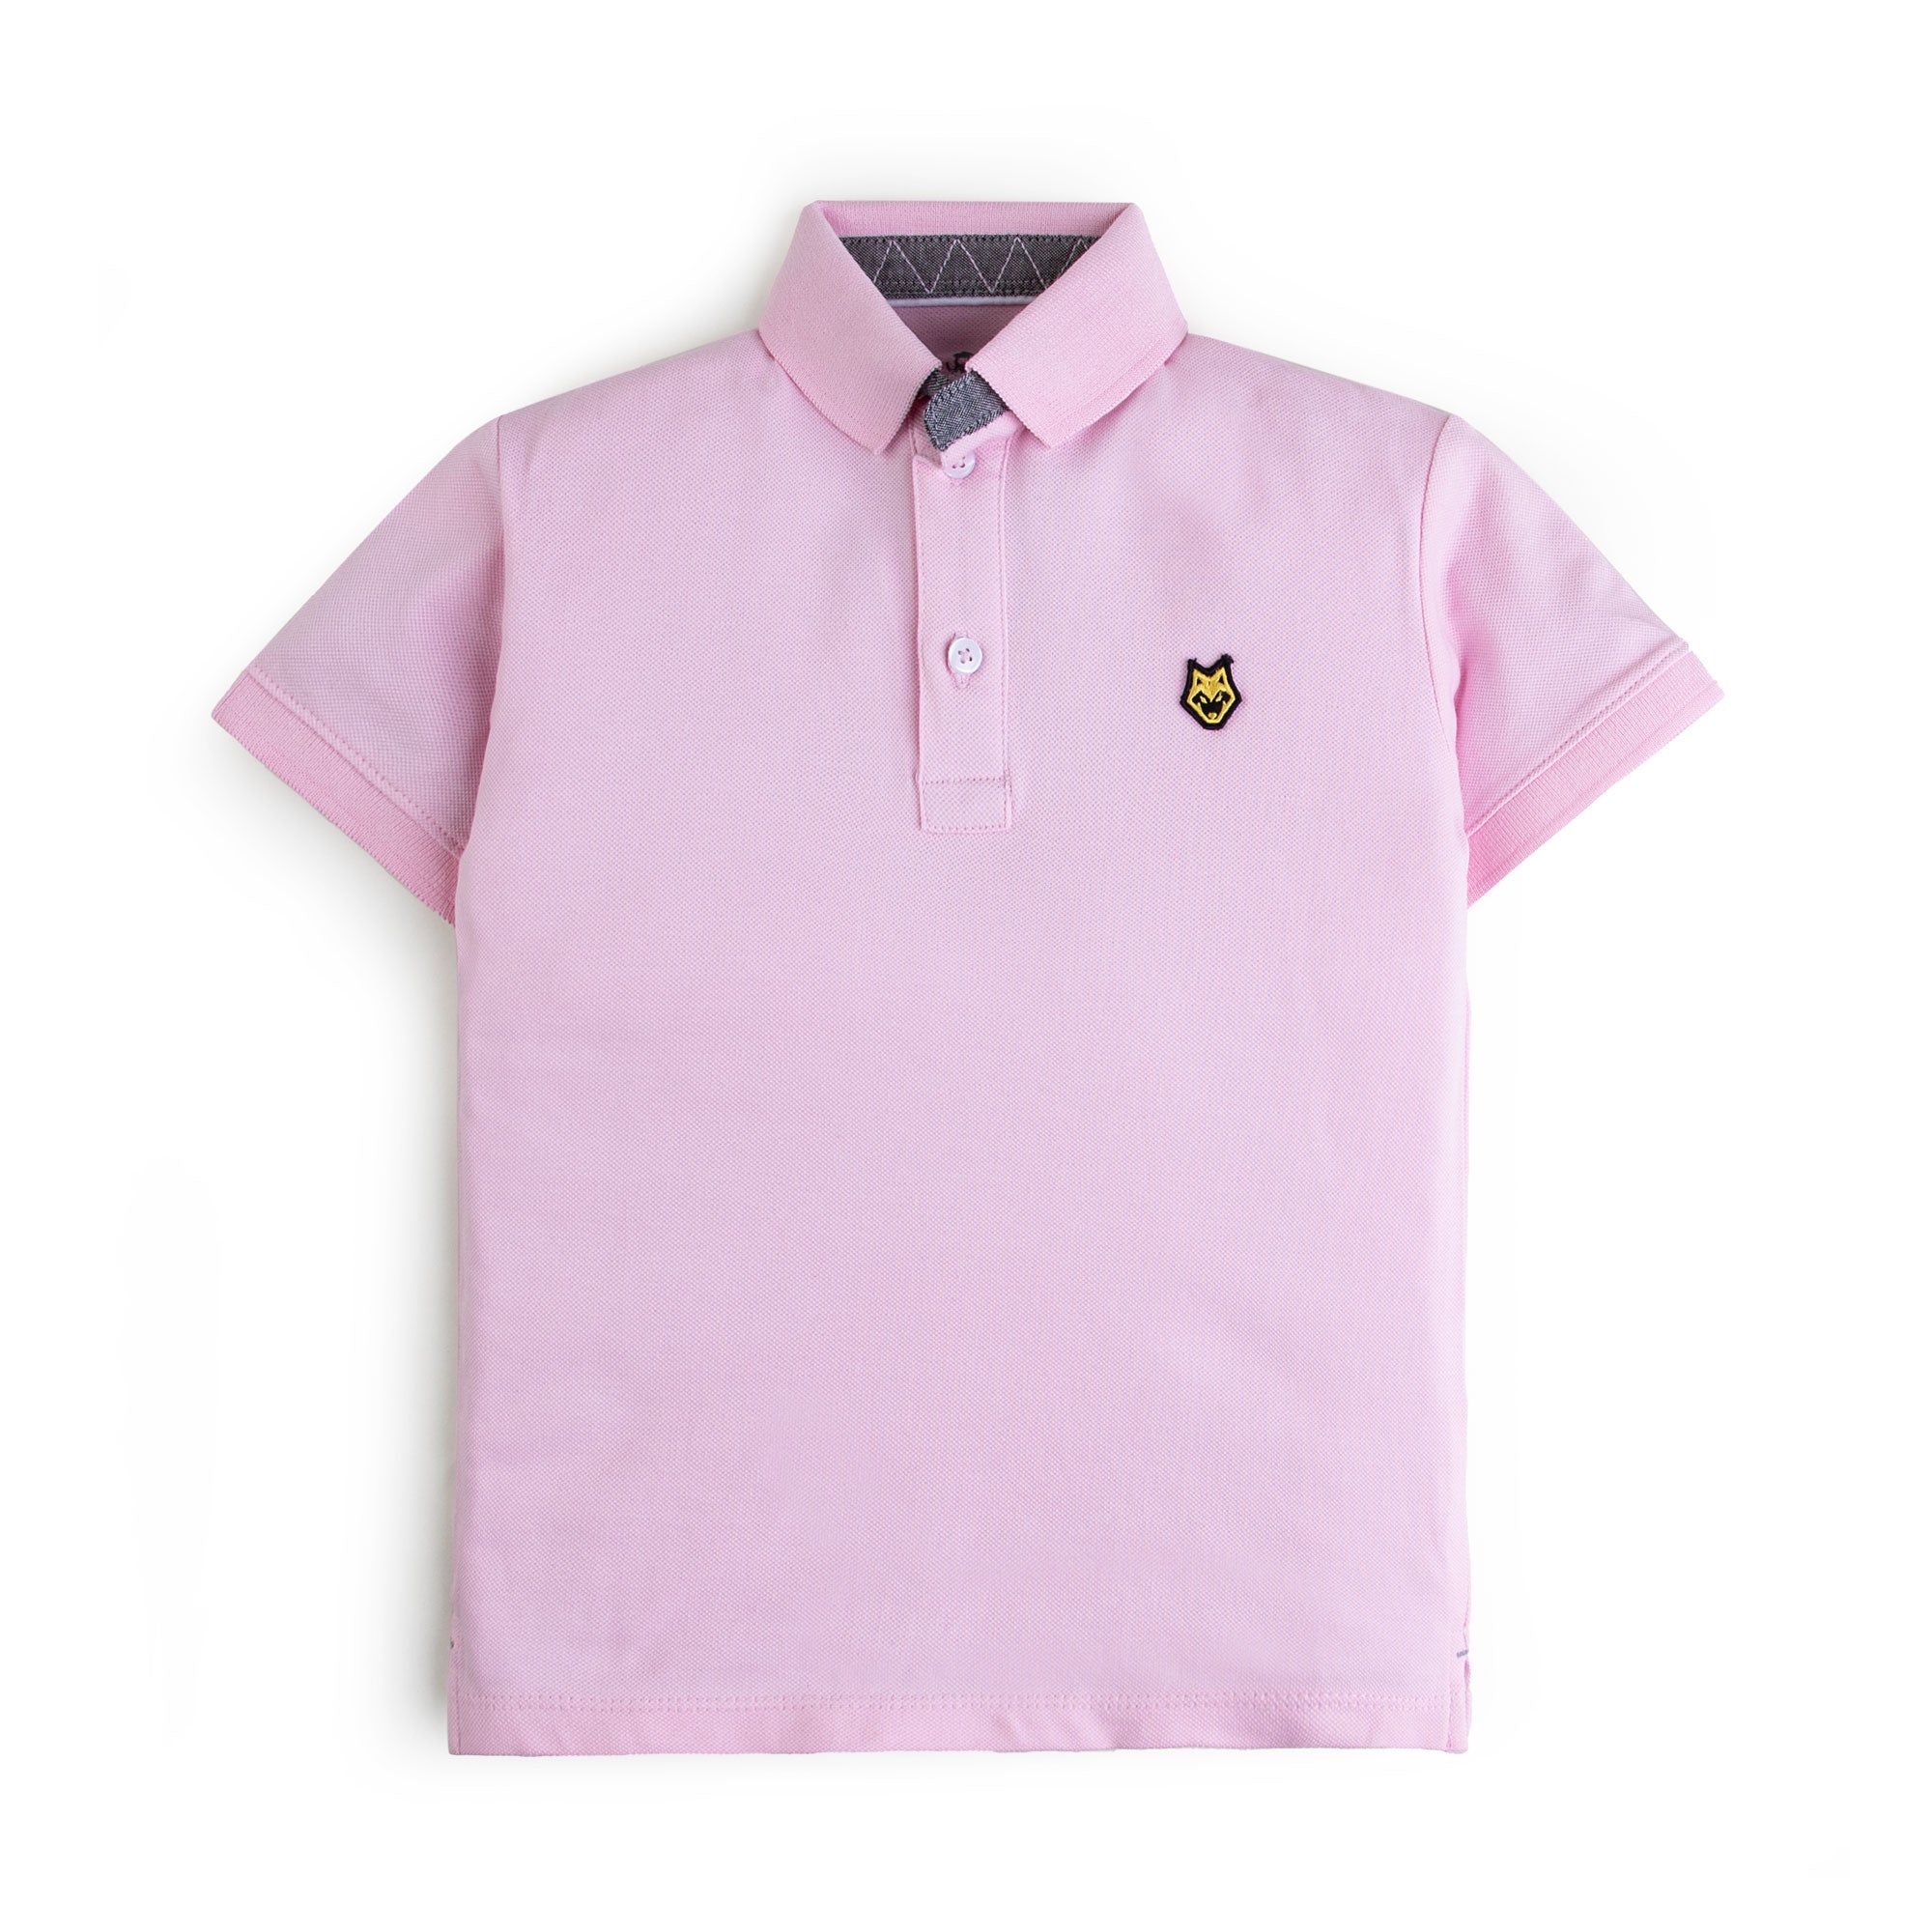 Classic Pink polo